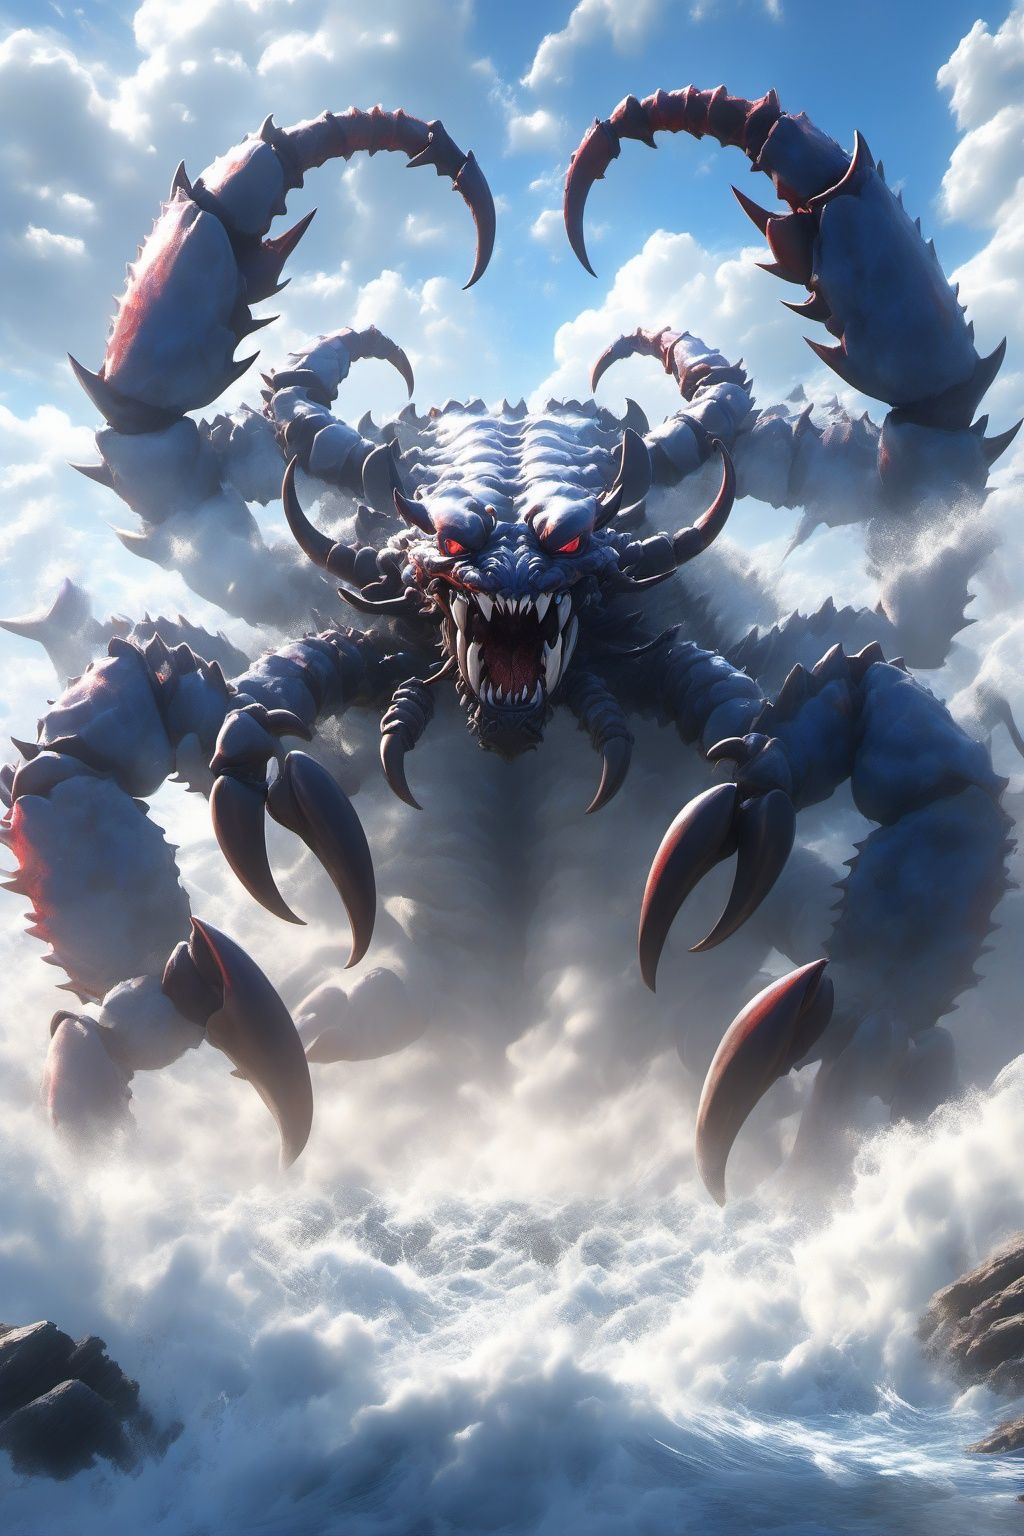 Hyperrealistic art BJ_Sacred_beast, Scorpion, open_mouth, red_eyes, outdoors, horns, sky, teeth, day, cloud, water, blue_sky, no_humans, bird, ocean, animal, cloudy_sky, sharp_teeth, claws, monster,cinematic lighting,strong contrast,high level of detail,Best quality,masterpiece,White background,<lora:SDXL_Sacred_beast:0.7>, . Extremely high-resolution details, photographic, realism pushed to extreme, fine texture, incredibly lifelike